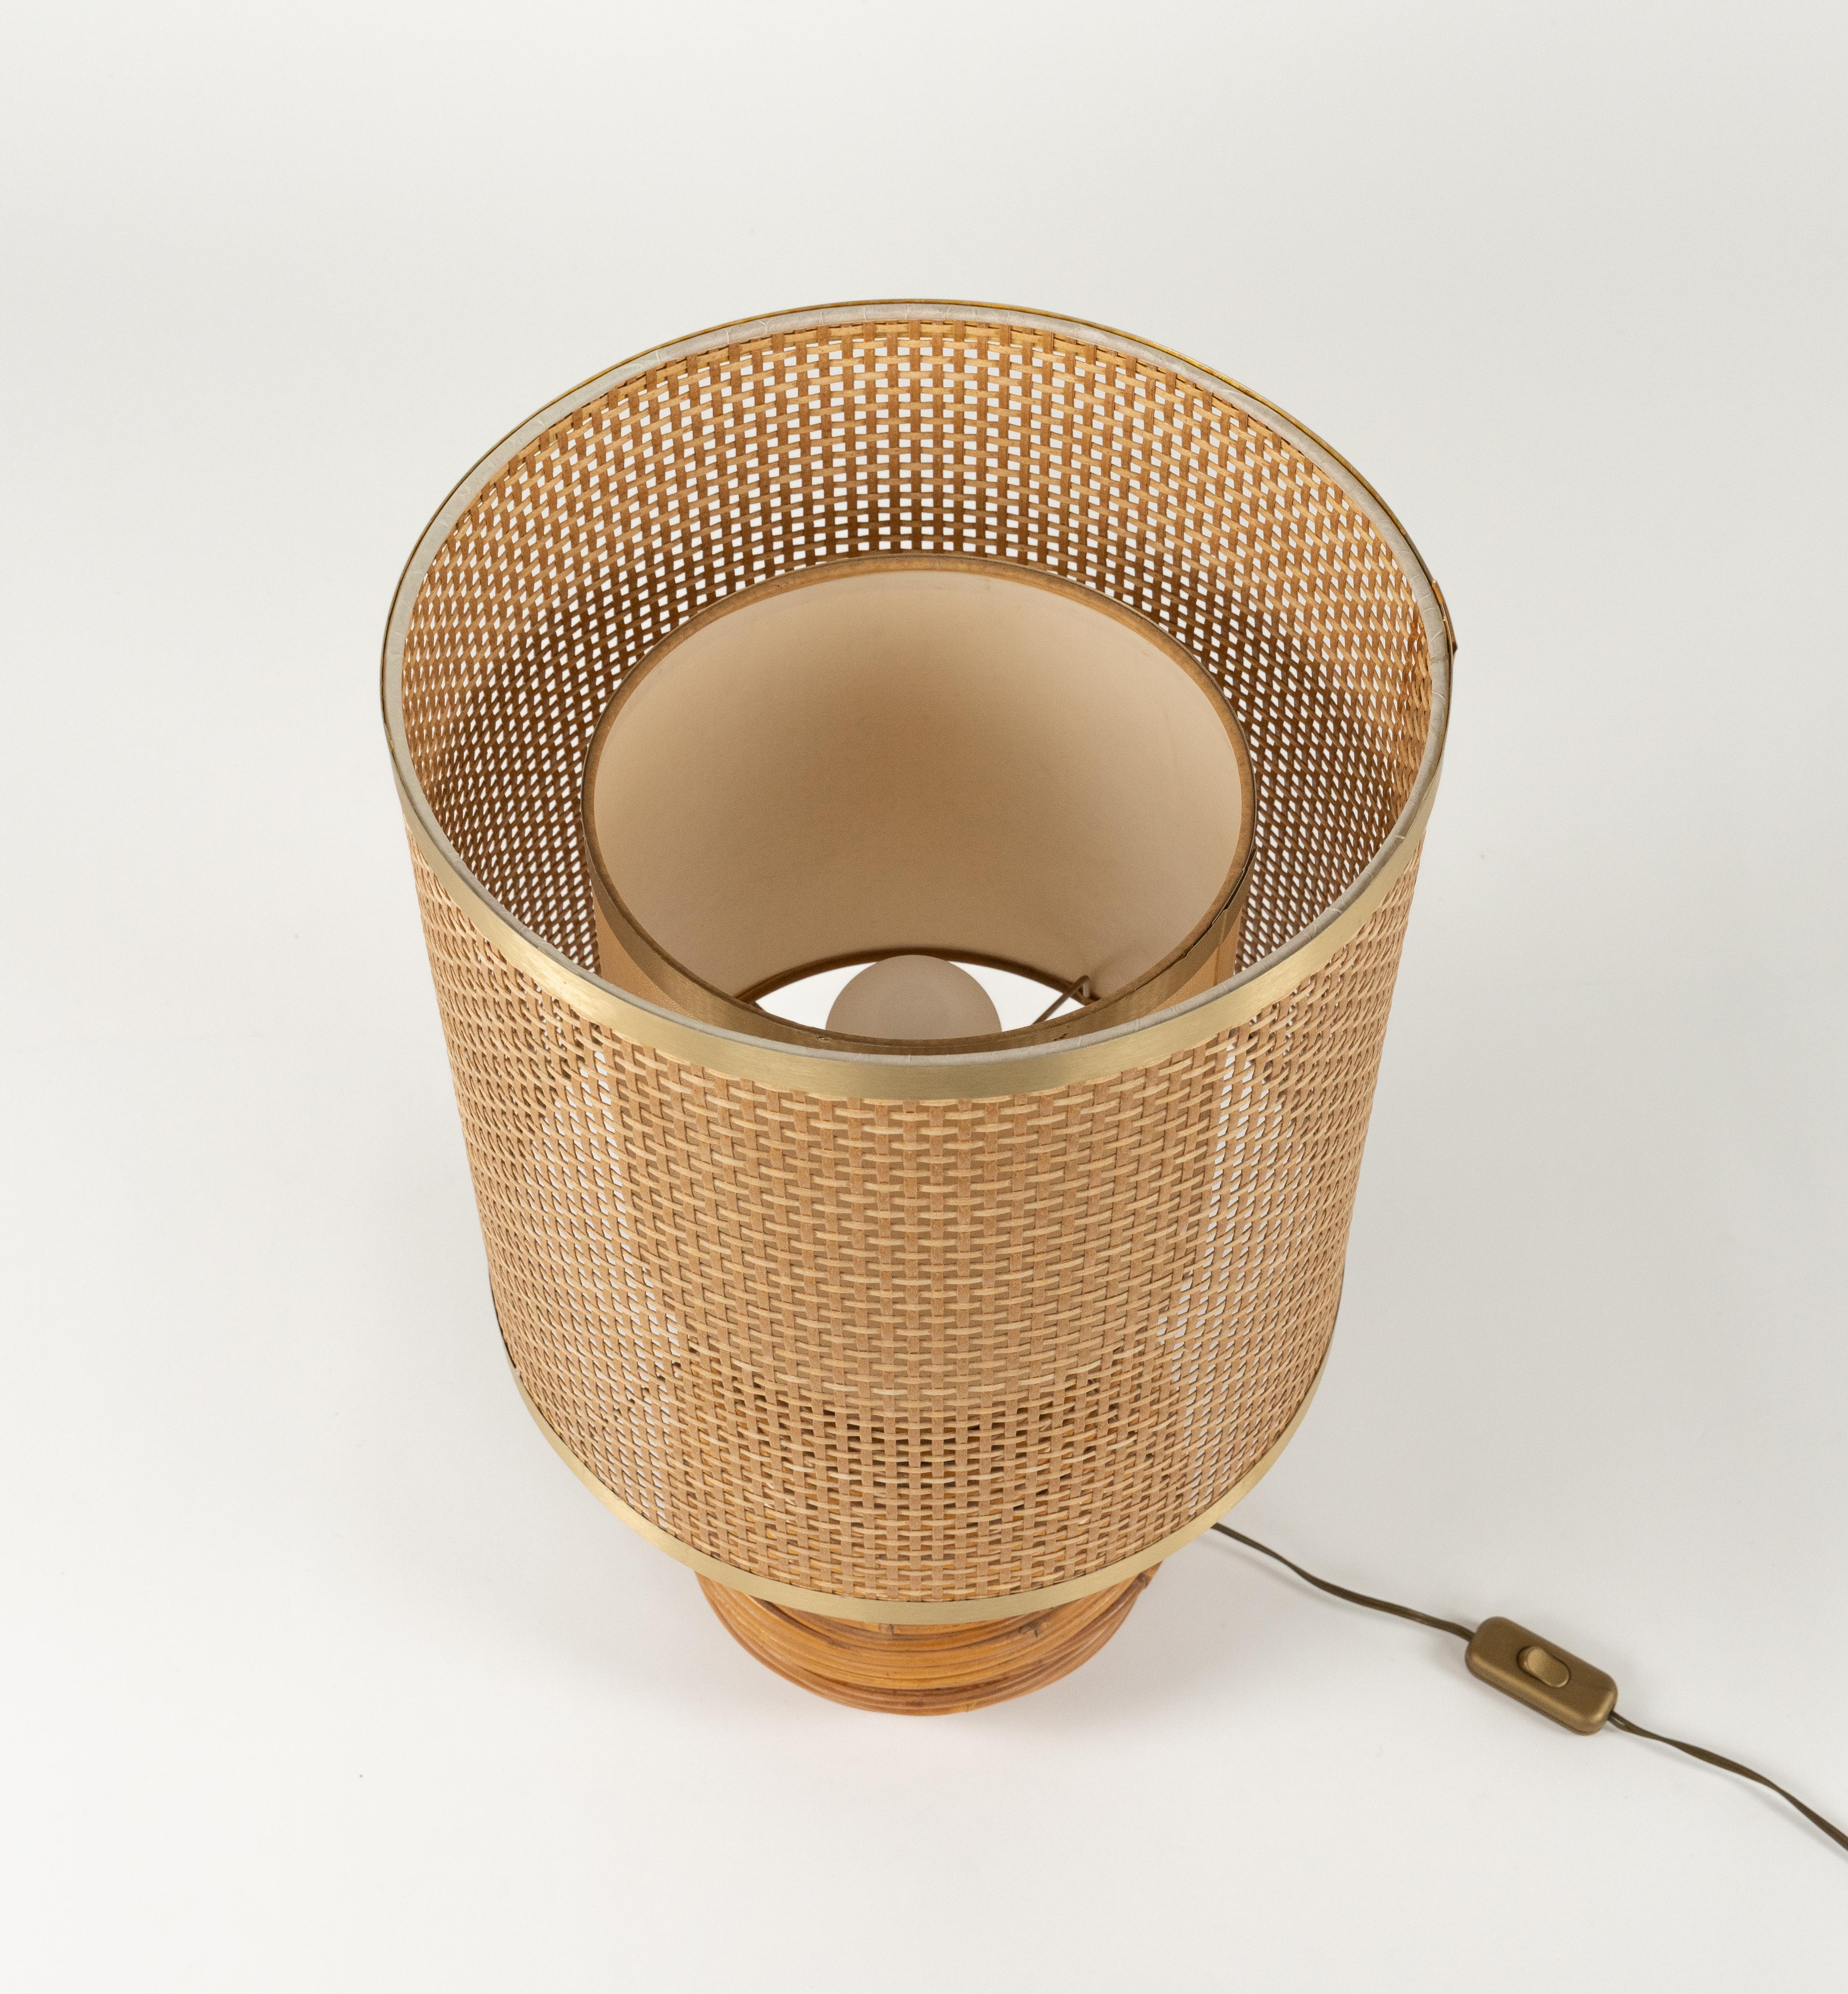 Midcentury Rattan, Wicker and Chrome Table Lamp by Vivai Del Sud, Italy 1970s For Sale 3